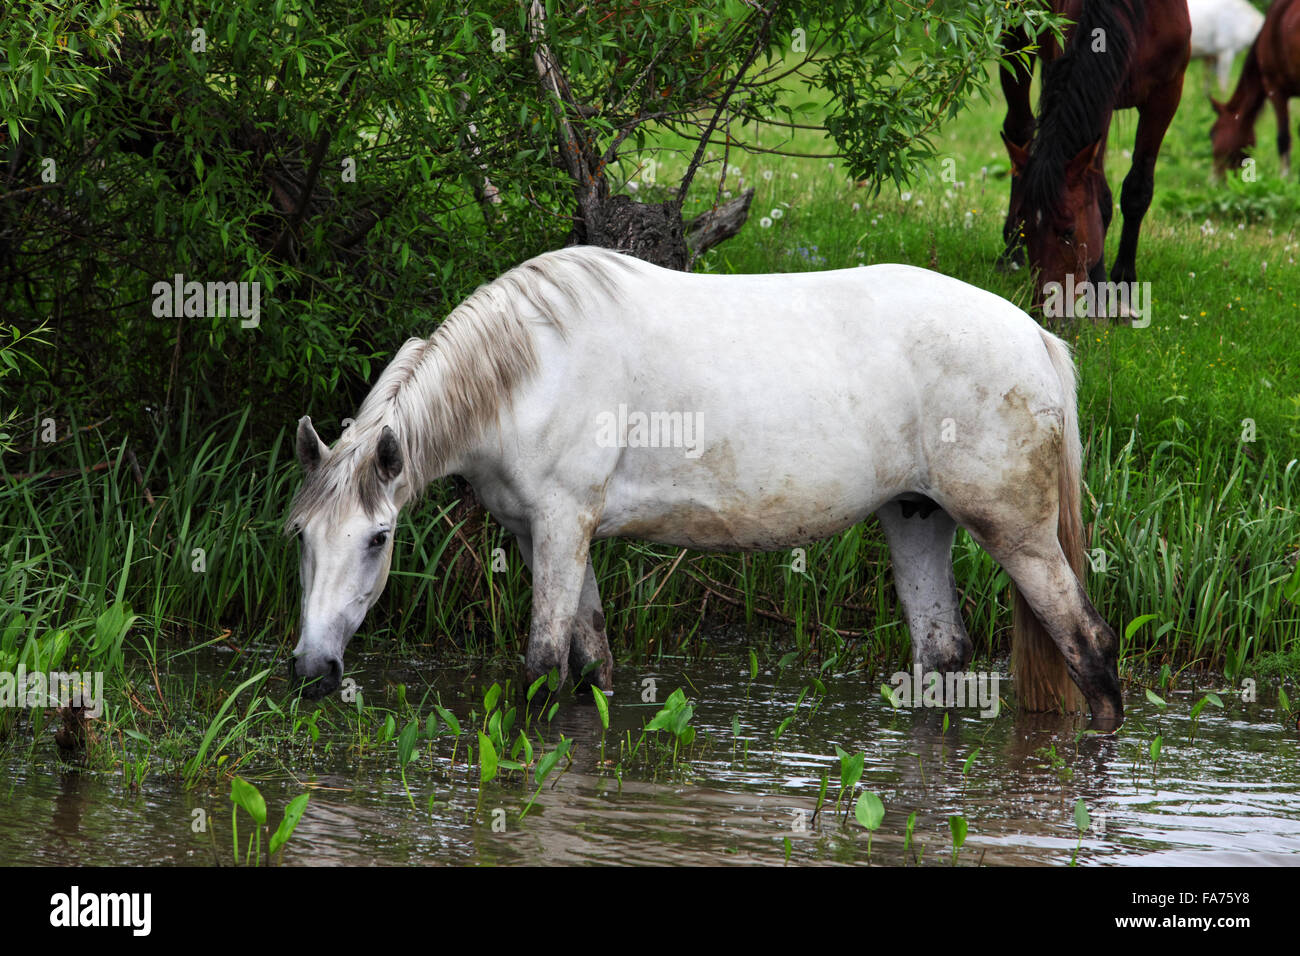 Horse grazing and drinking from river stream Stock Photo